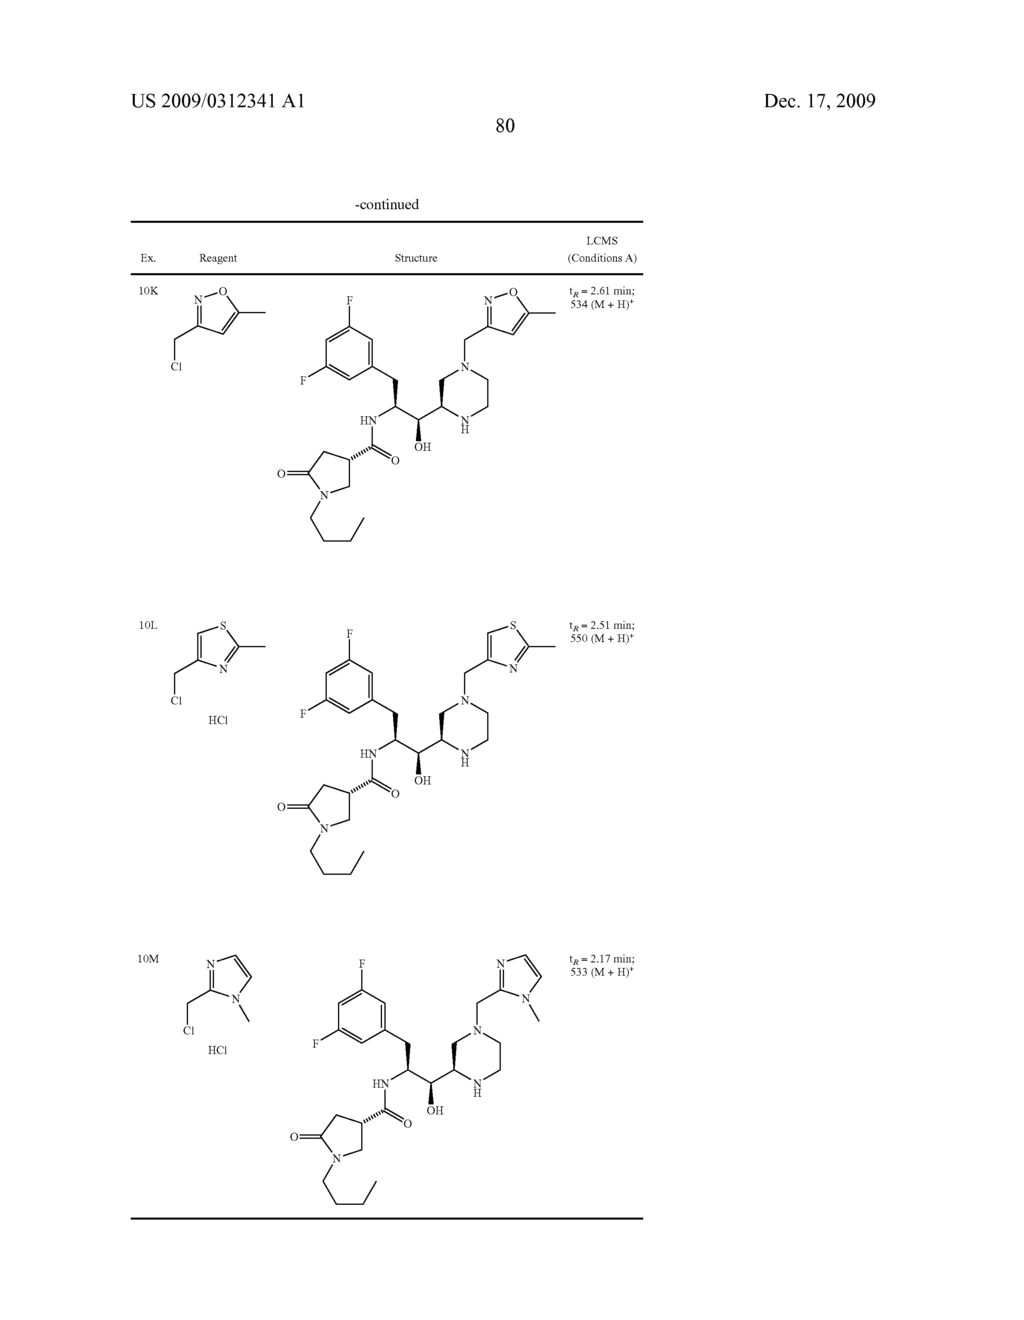 CYCLIC AMINE BACE-1 INHIBITORS HAVING A HETEROCYCLIC SUBSTITUENT - diagram, schematic, and image 81